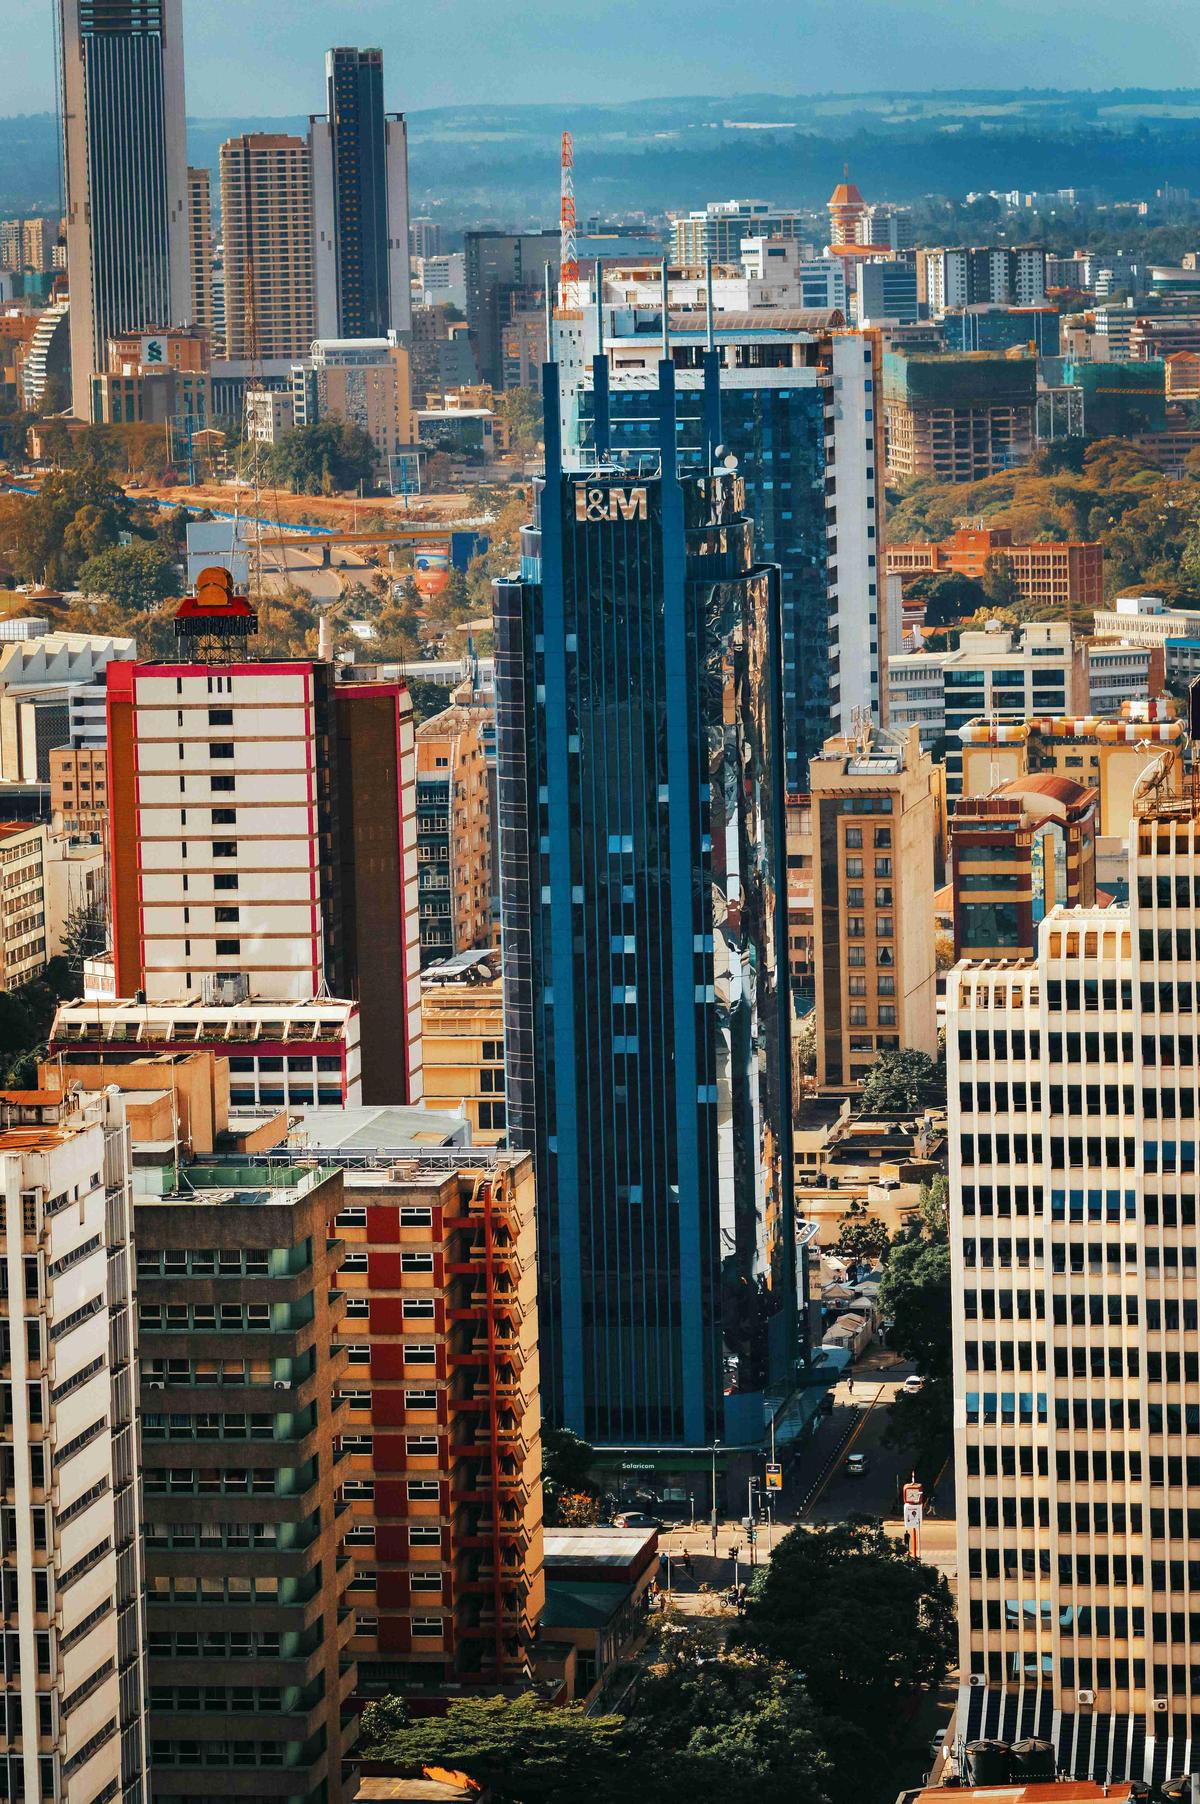 Urban Canyon View with Skyscrapers and Busy Street